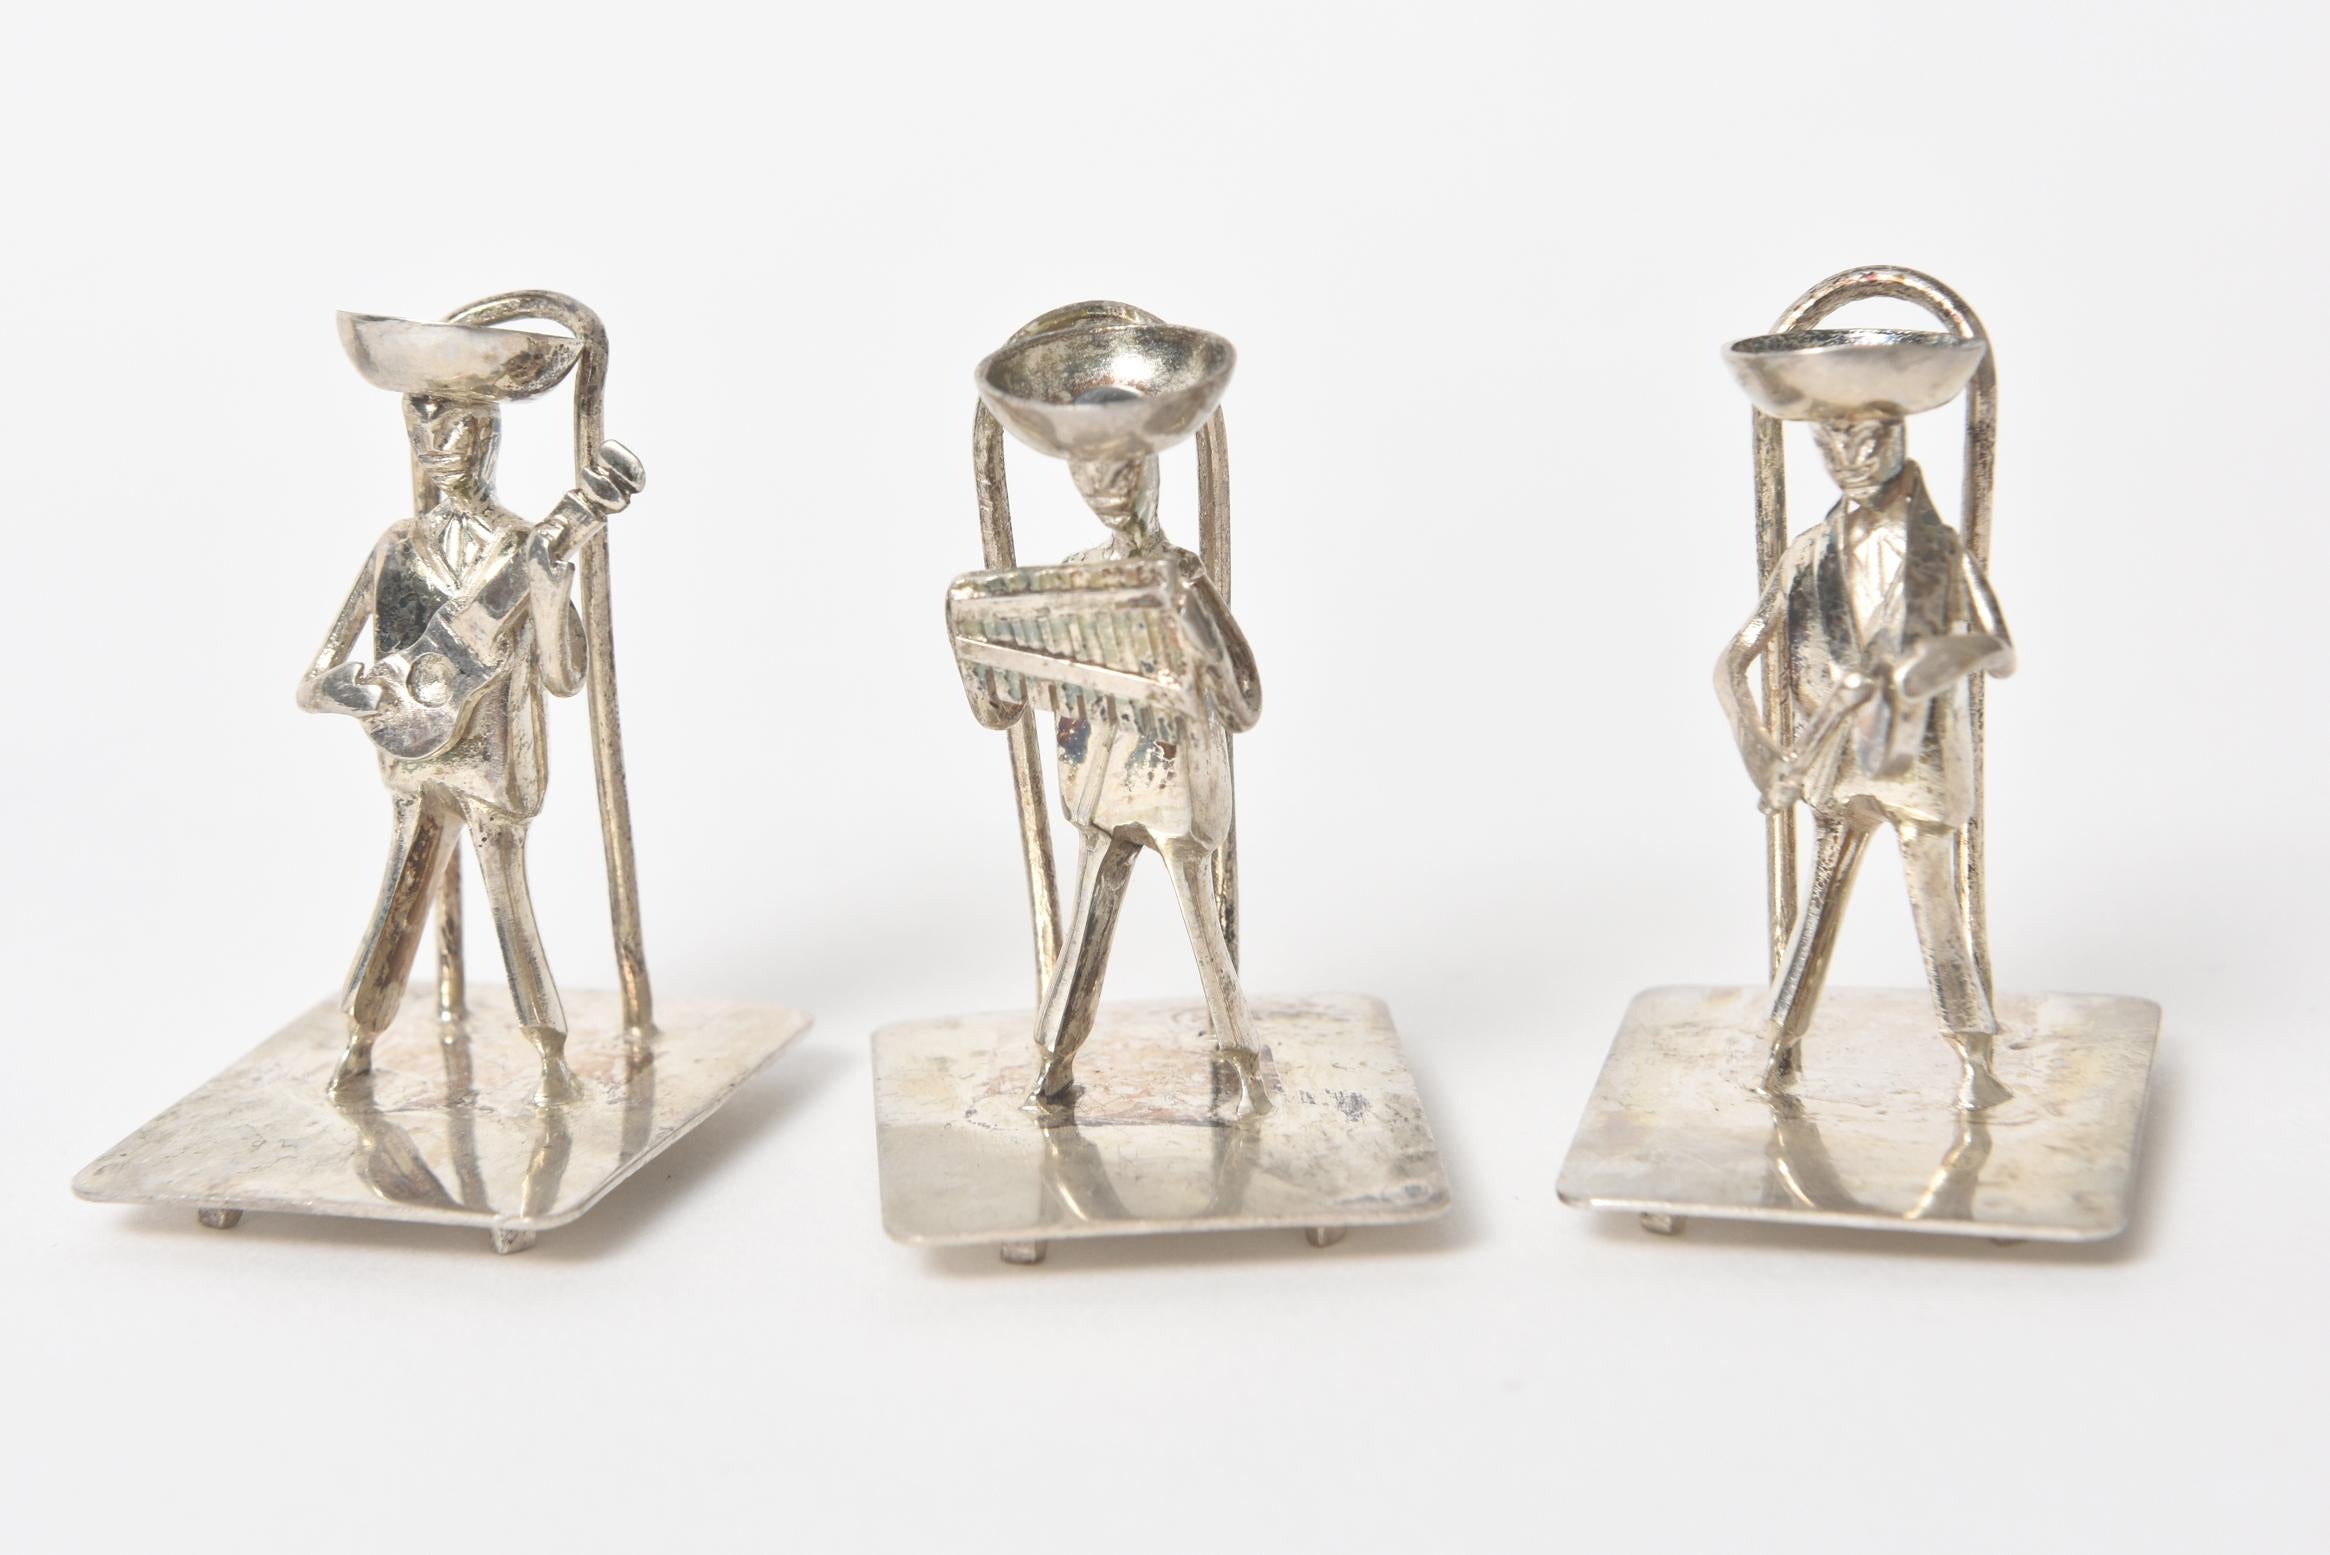 Silver Musician Mariachi Band Figural Place Card Holders Placecard Set of 10 2